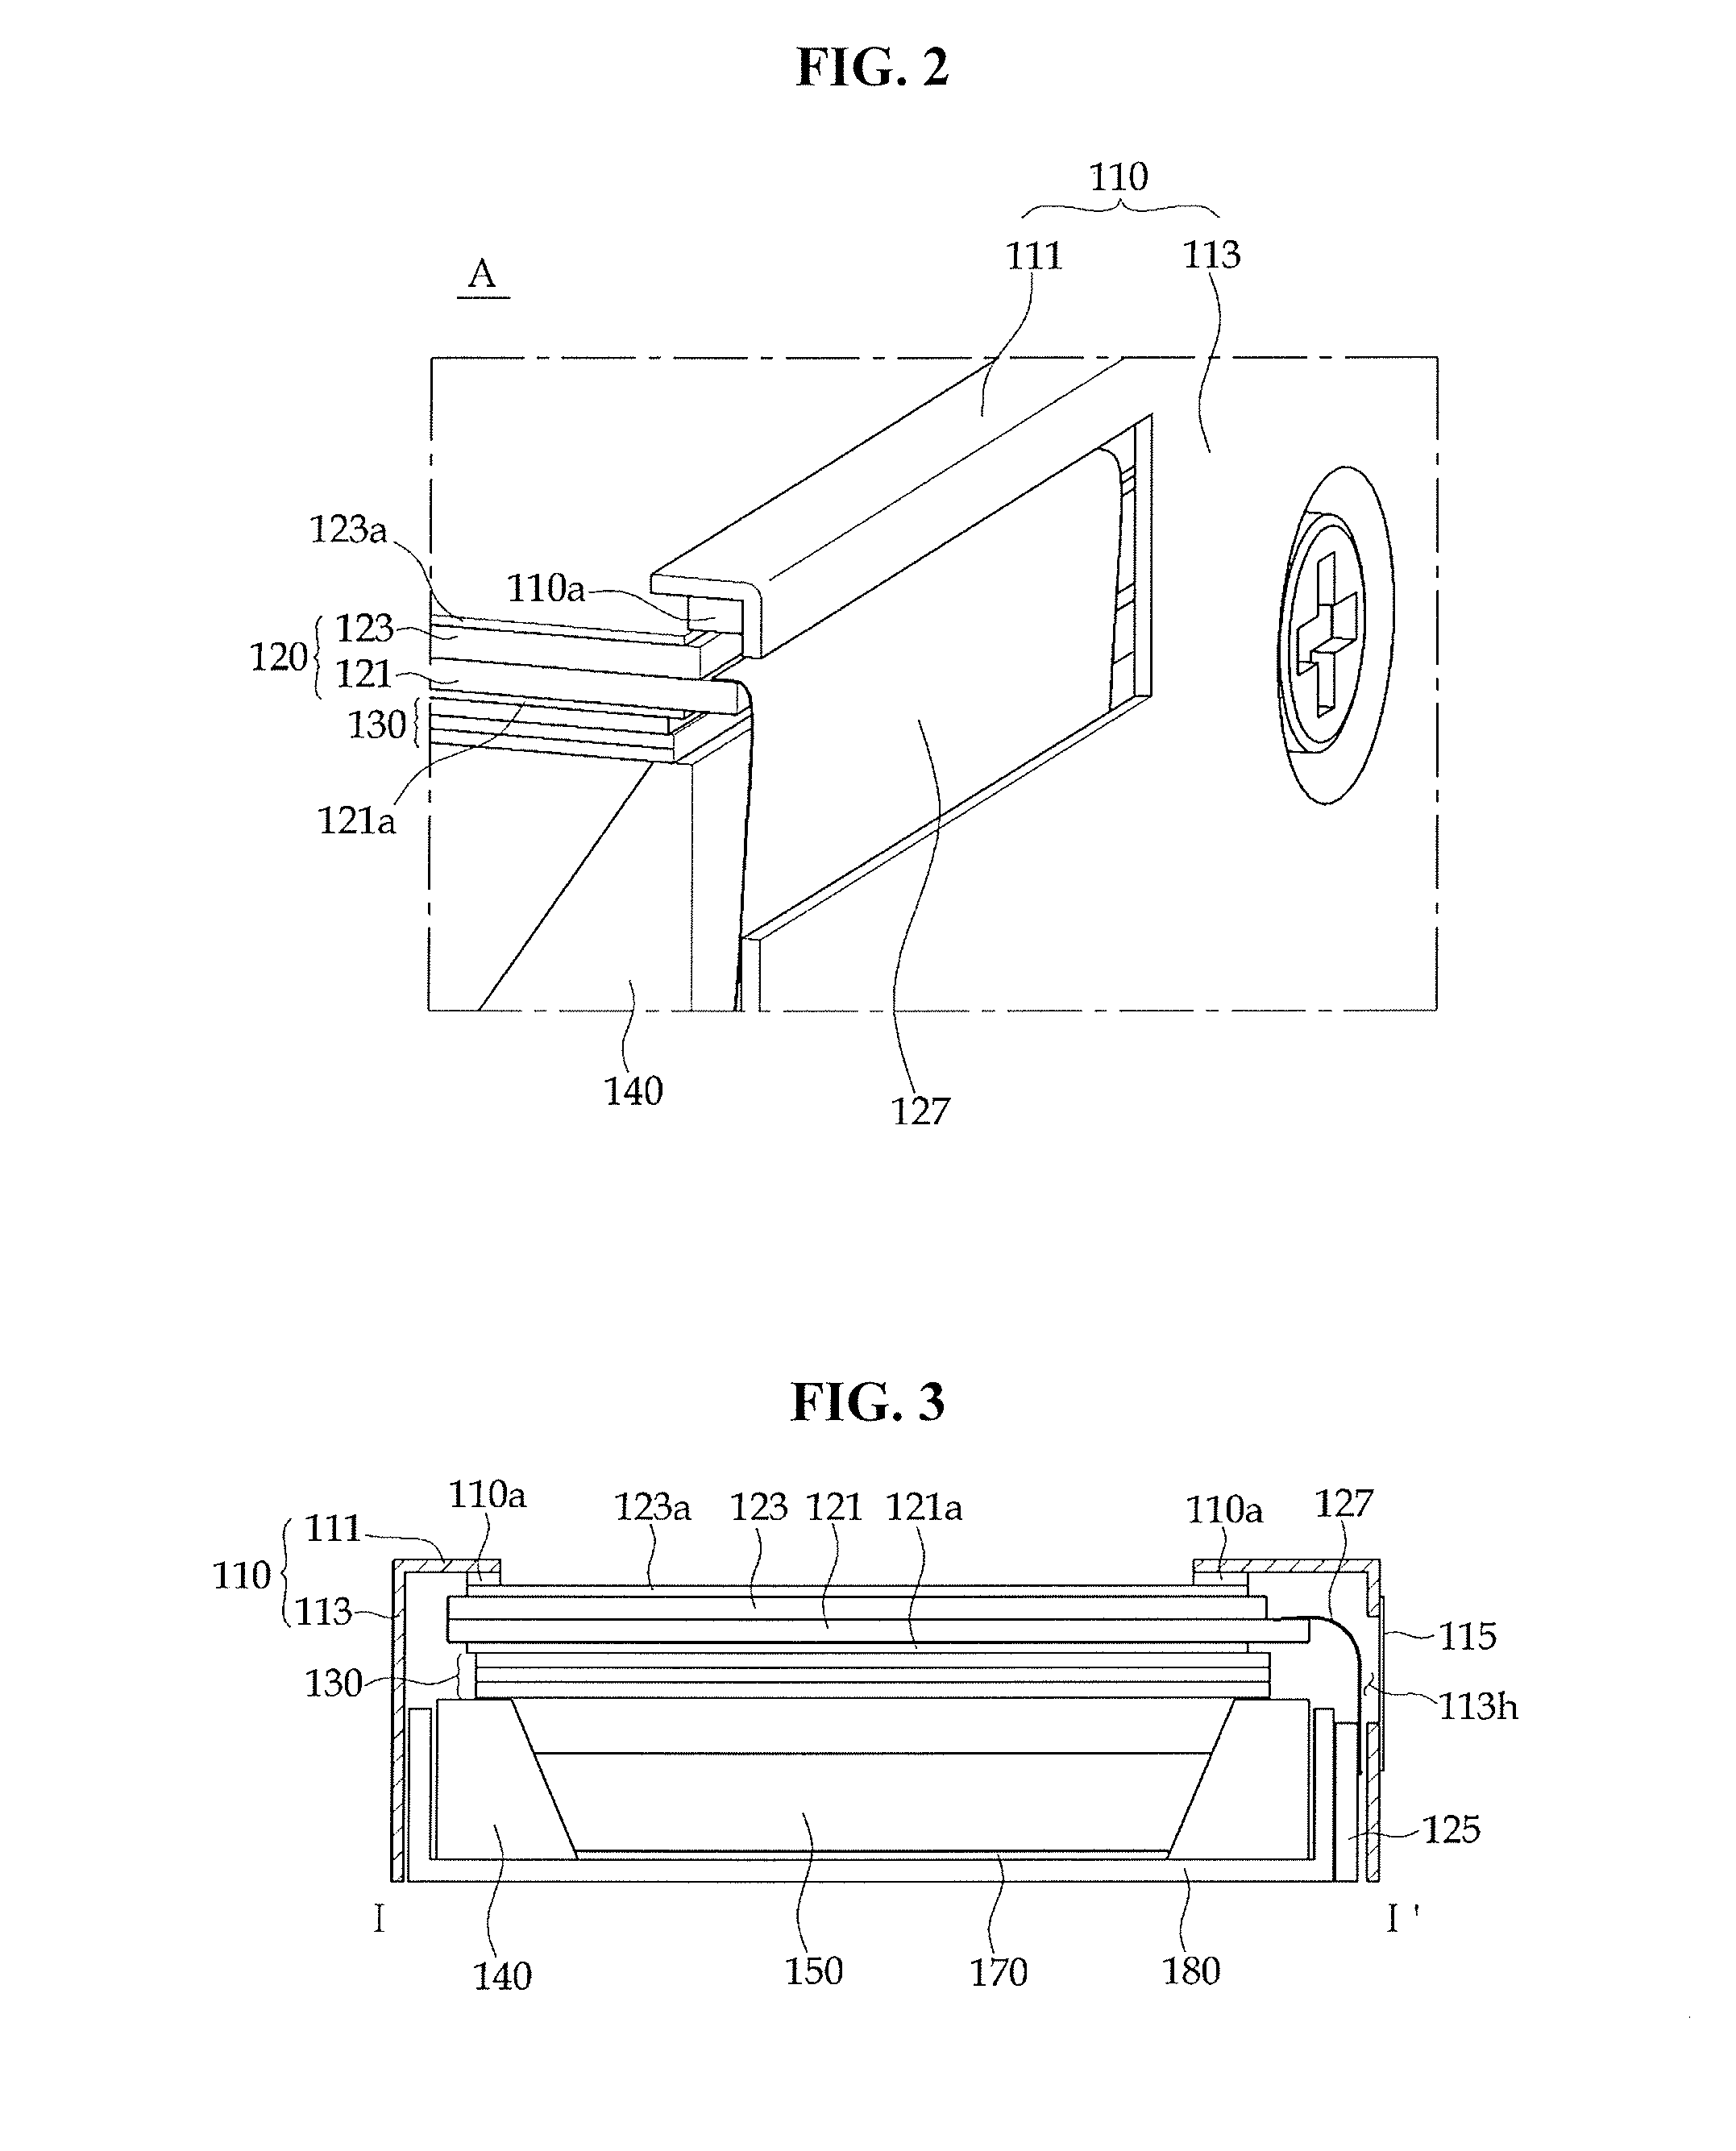 Display device and multi display device using the same